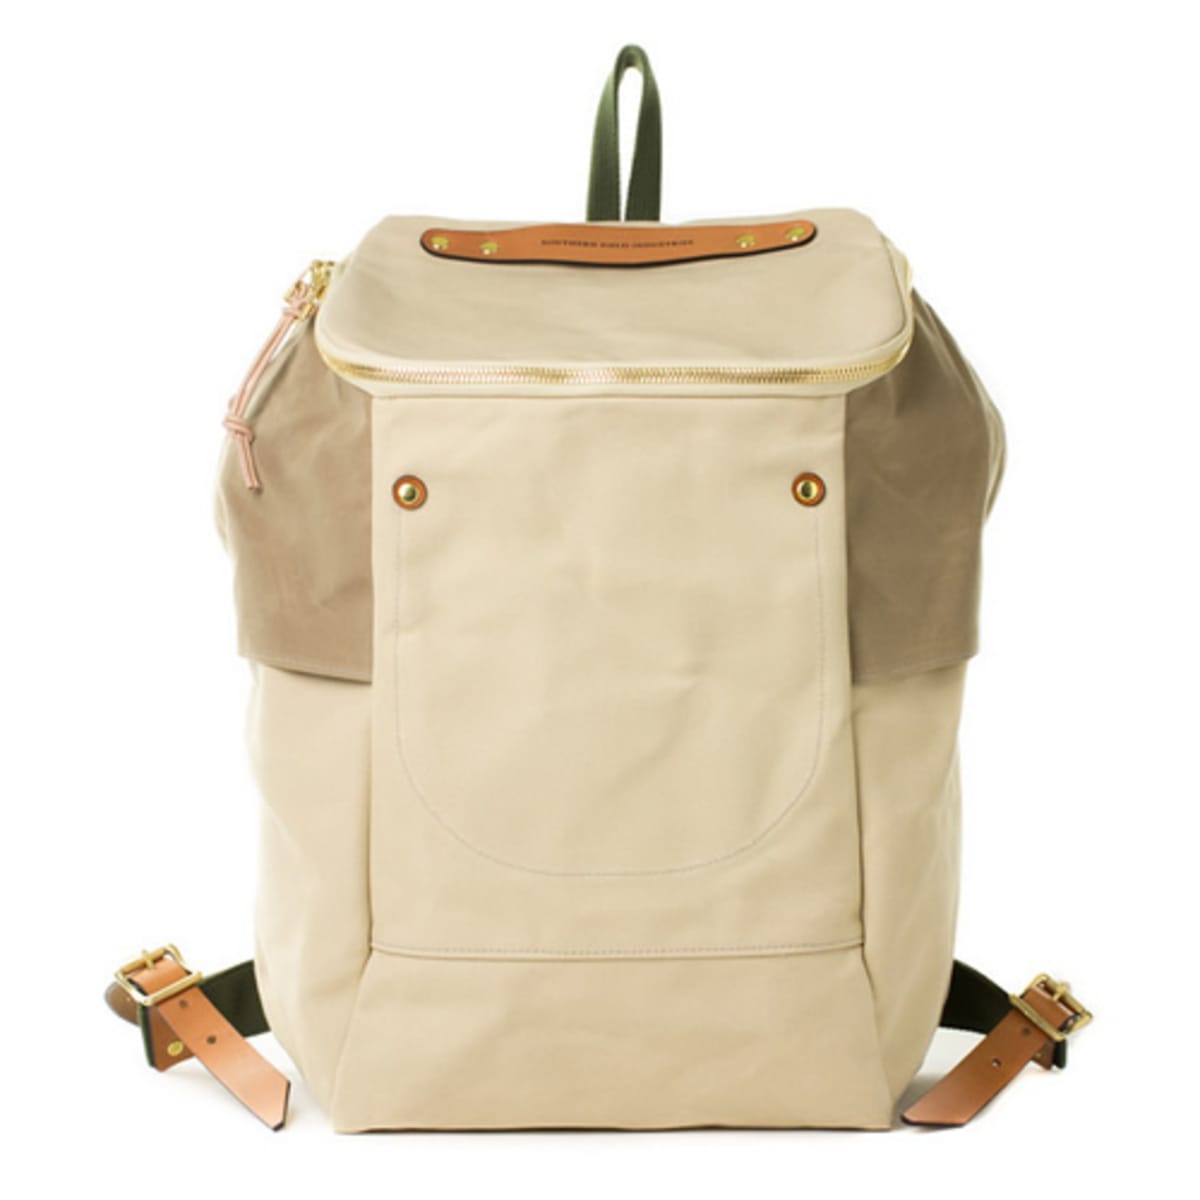 Southern Field Industries PX Backpack - Acquire